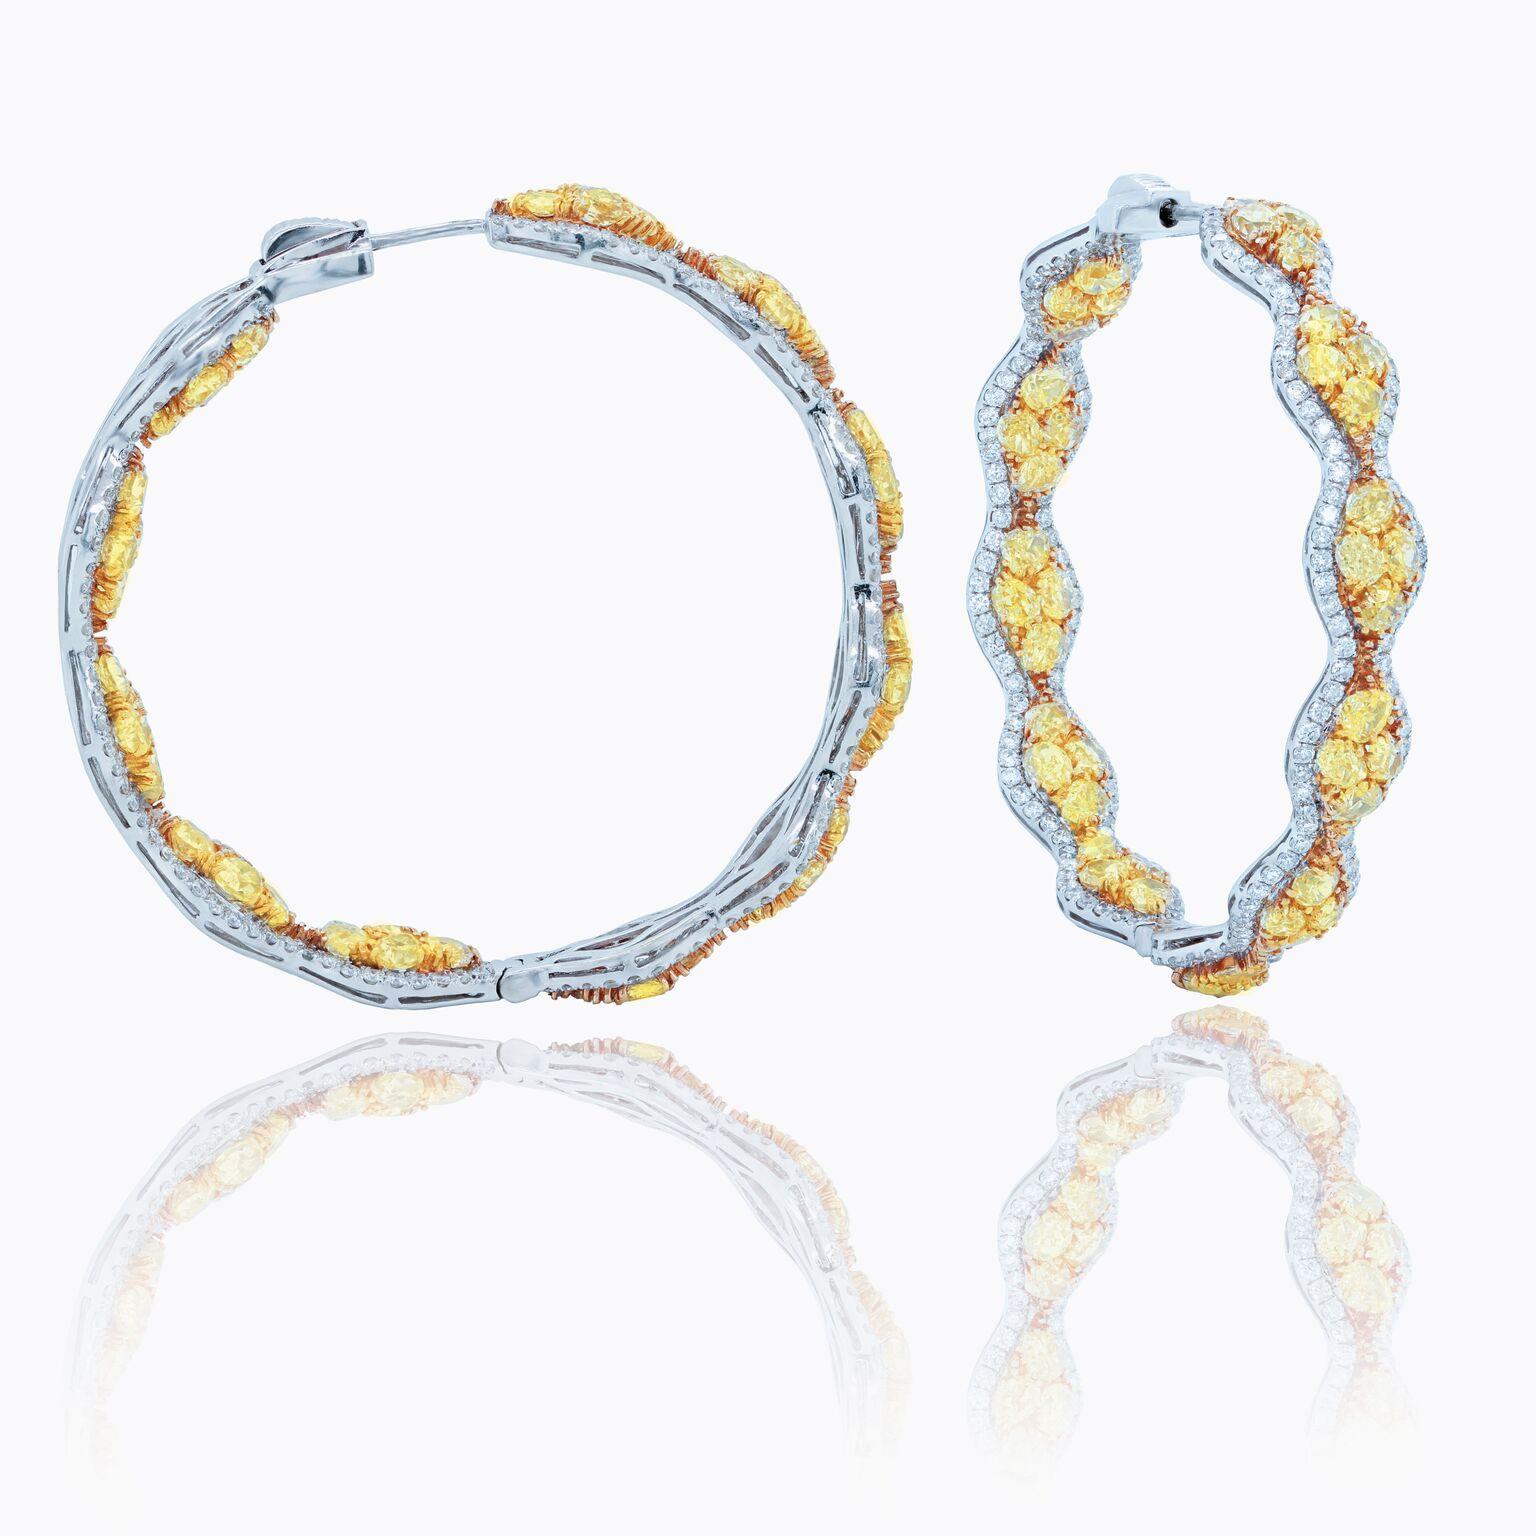 18 kt white and yellow gold inside-out hoop earrings with a double wavy design lined with white diamonds and adorned with yellow diamonds totaling 13.00 cts tw.
Diana M. is a leading supplier of top-quality fine jewelry for over 35 years.
Diana M is